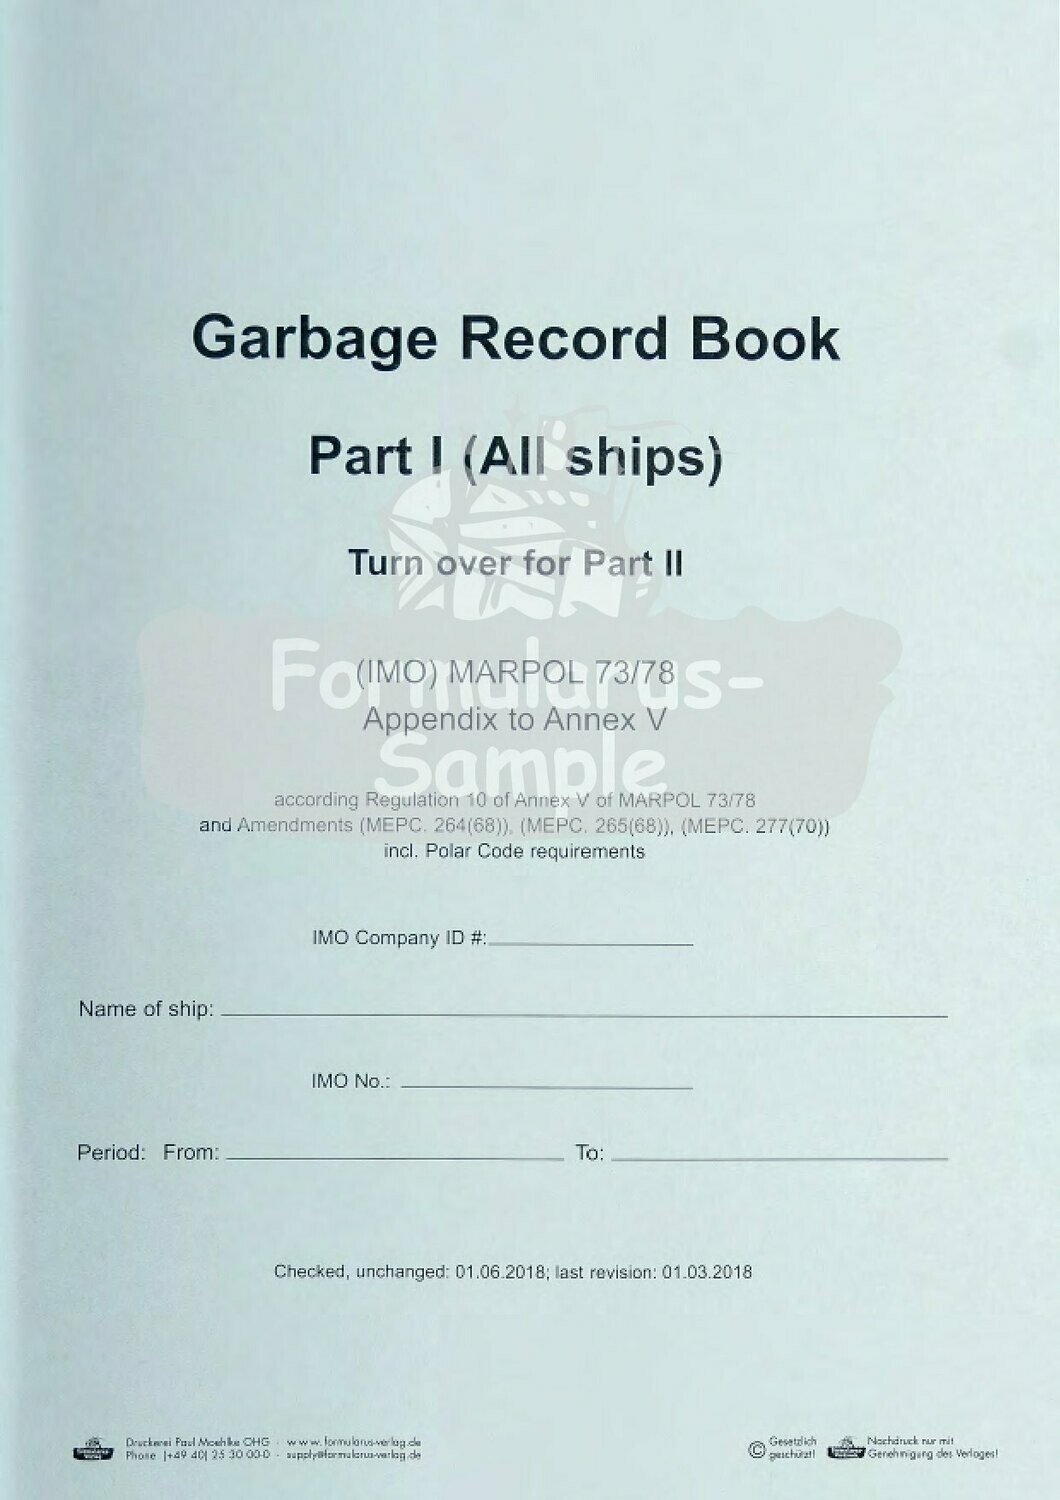 Garbage Record Book Part I + II